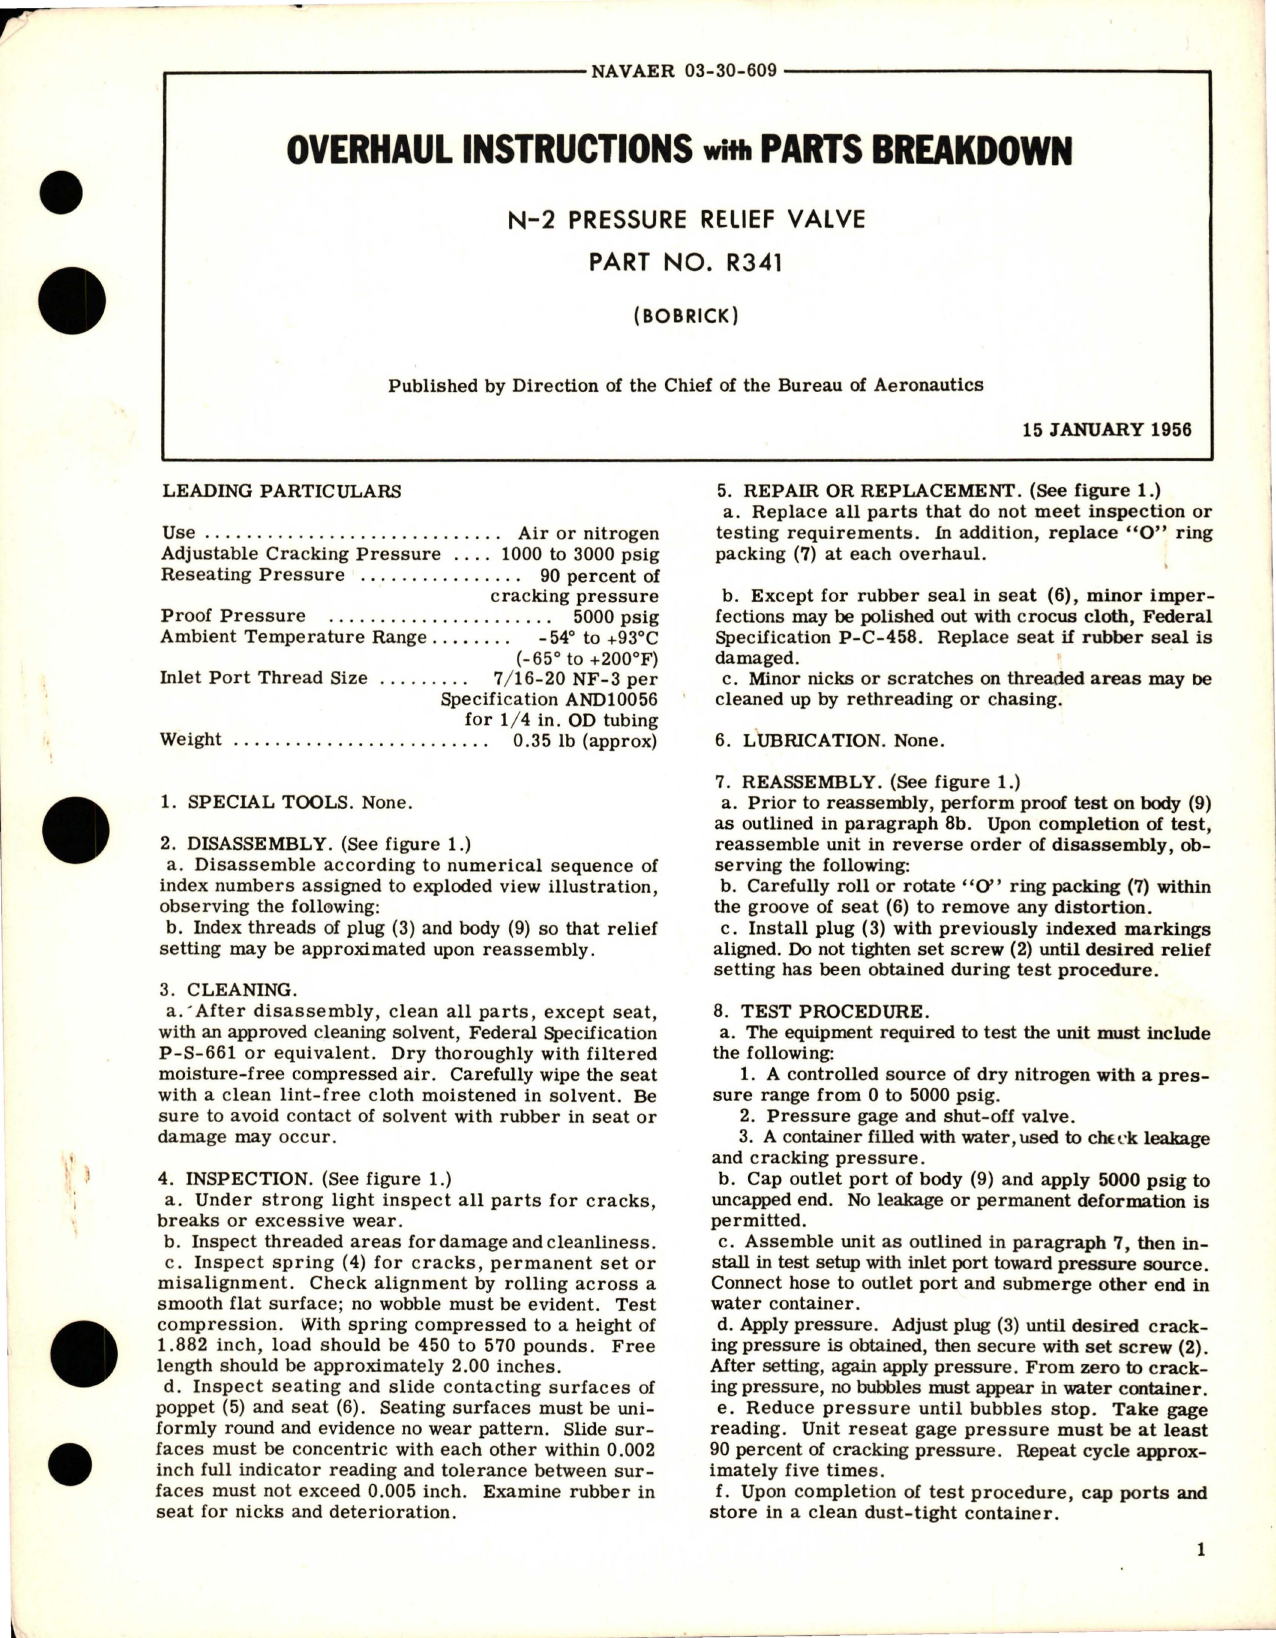 Sample page 1 from AirCorps Library document: Overhaul Instructions with Parts Breakdown for N-2 Pressure Relief Valve - Part R341